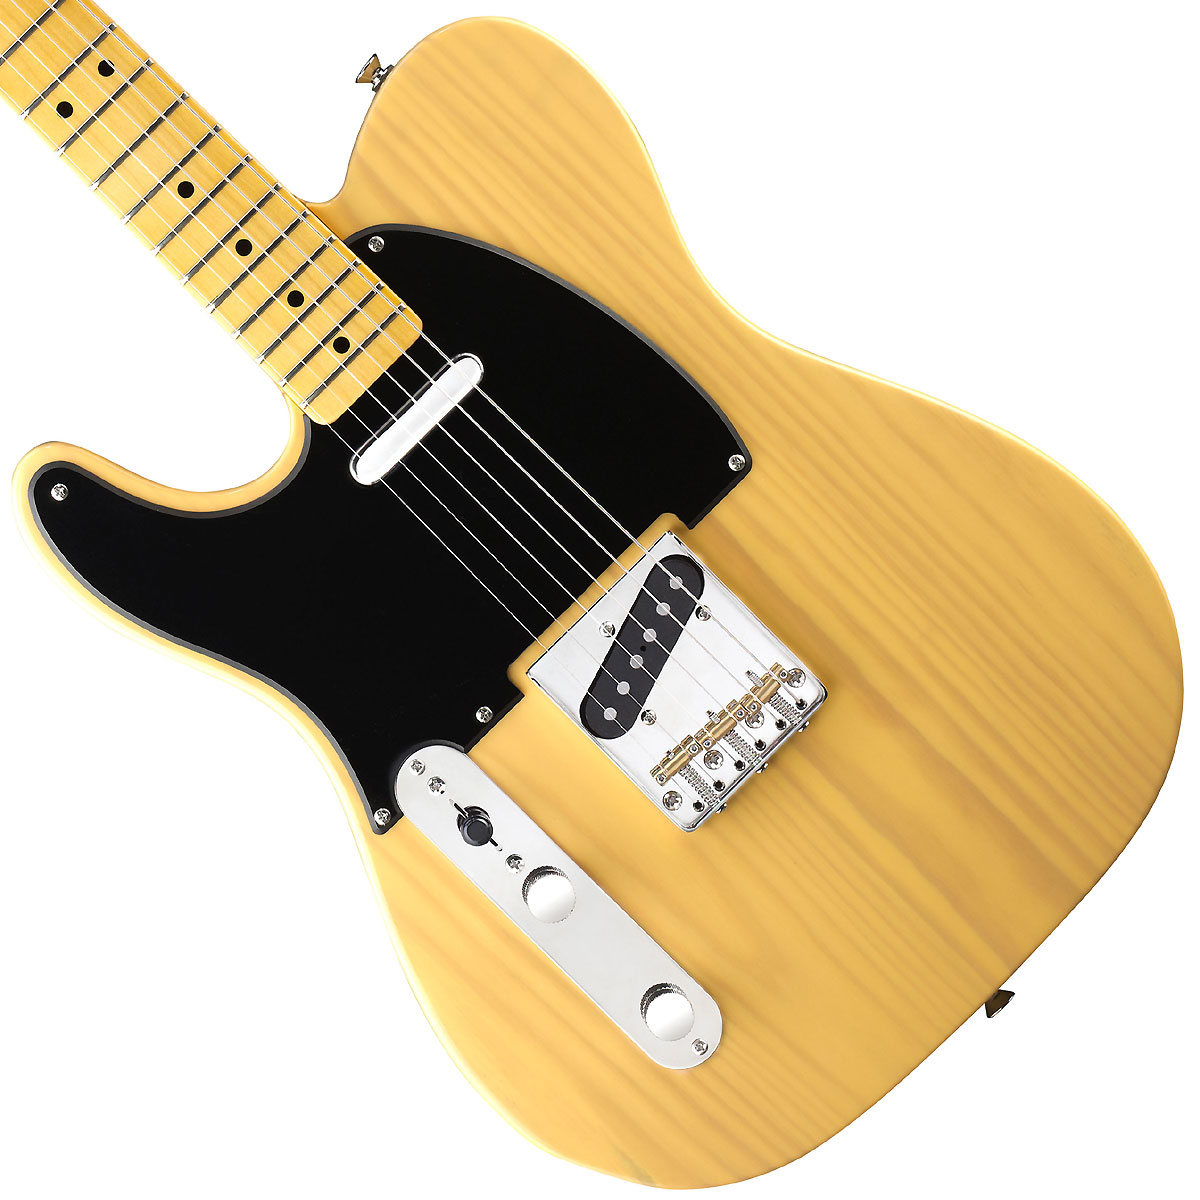 Squier Classic Vibe Telecaster '50s Lh Gaucher Mn - Butterscotch Blonde - Left-handed electric guitar - Variation 2